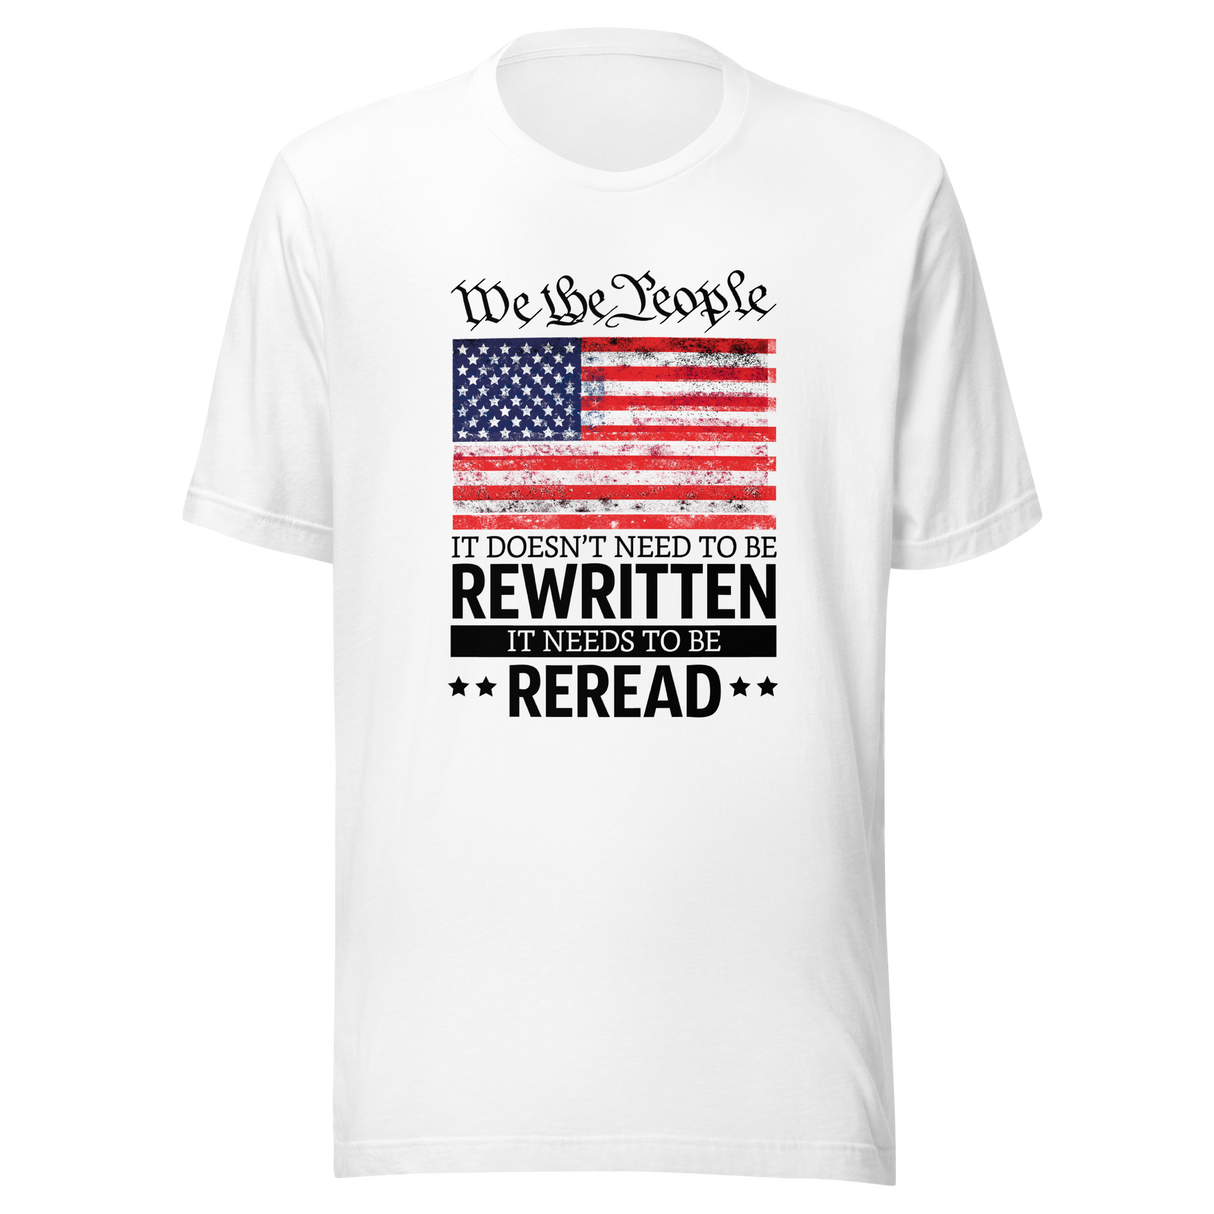 we-the-people-it-doesnt-need-to-be-rewritten-it-needs-to-be-reread-we-the-people-tee-constitution-t-shirt-usa-tee-t-shirt-tee#color_white